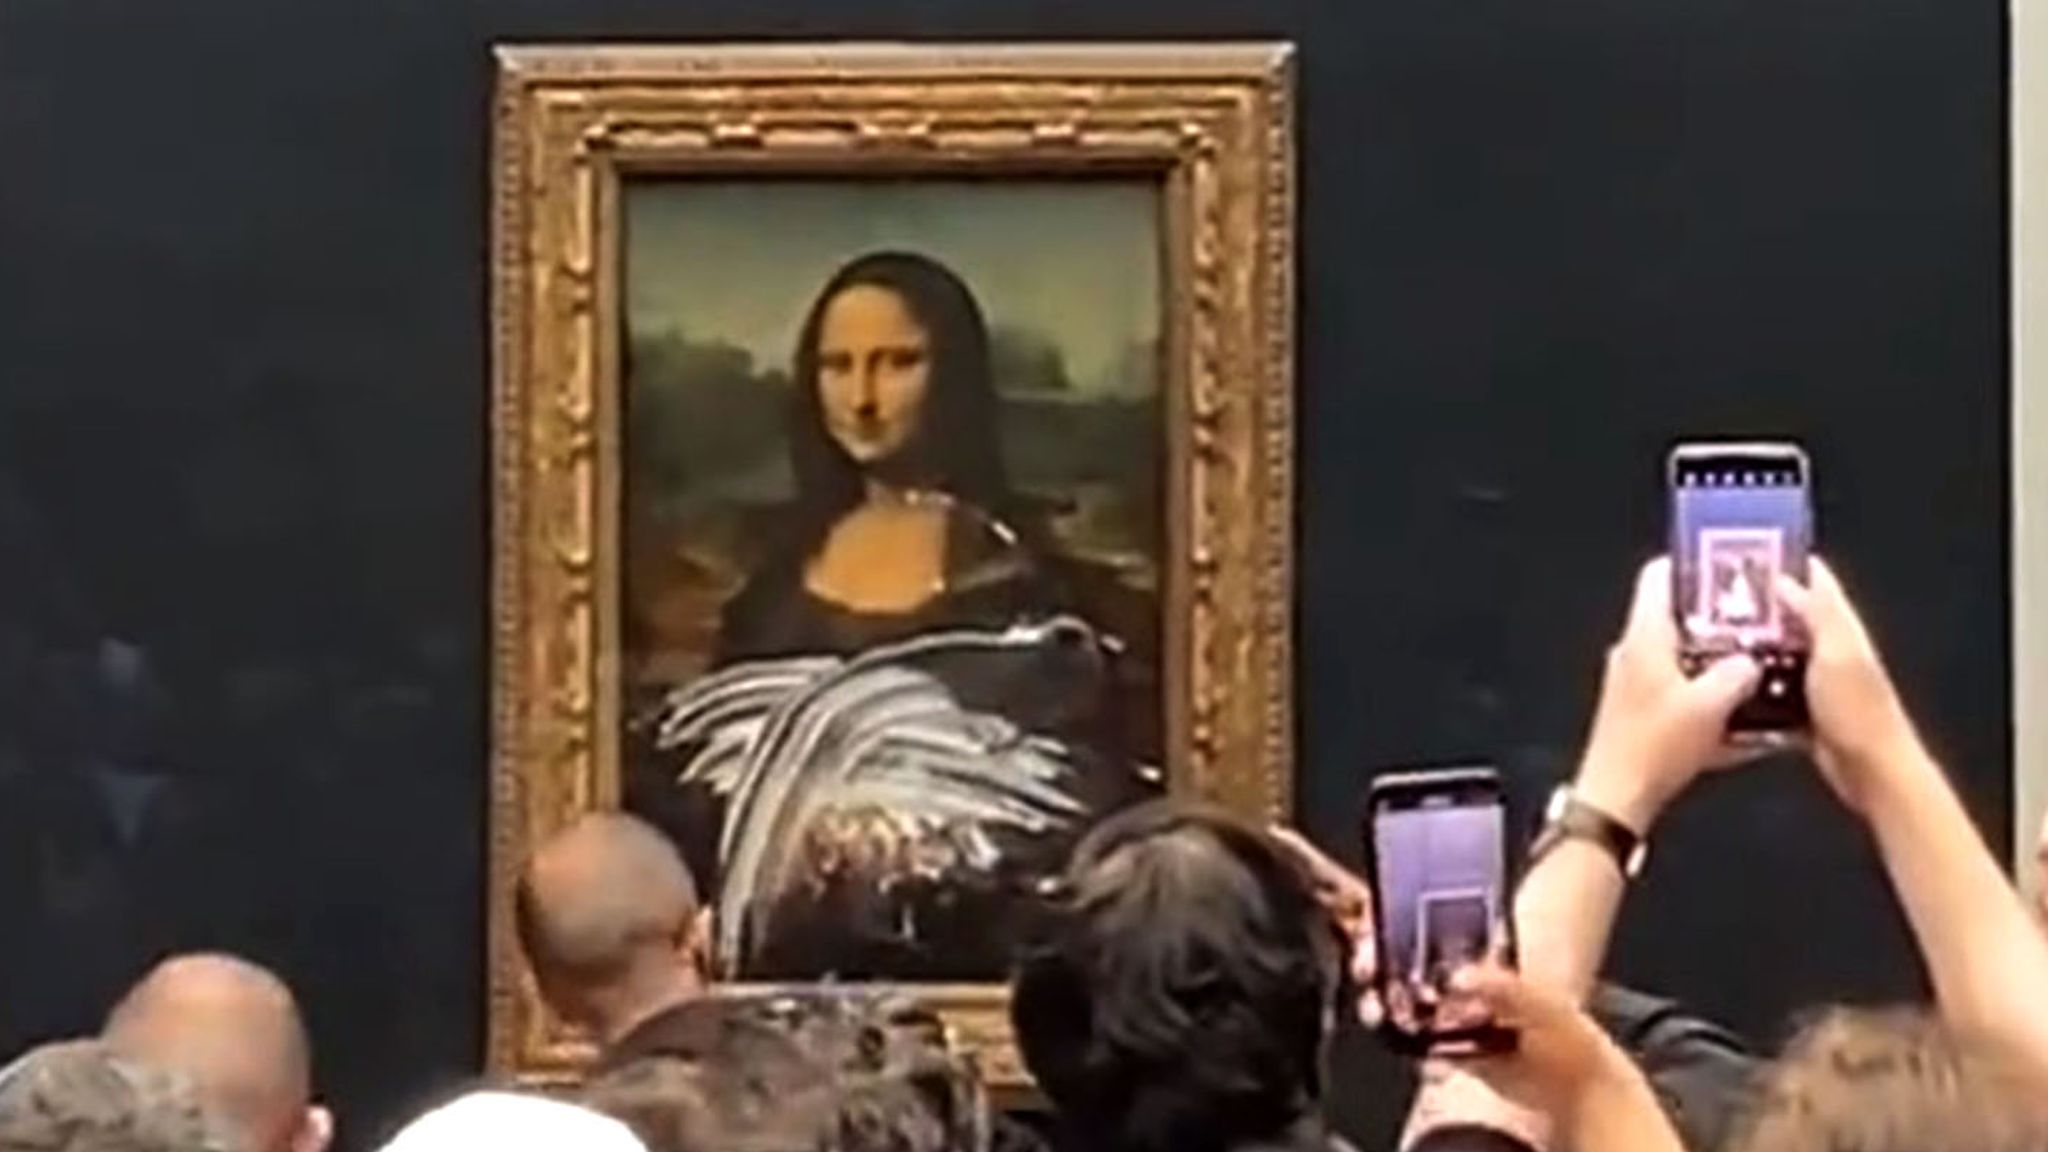 Man disguised as ‘old woman’ attacks Mona Lisa with cake